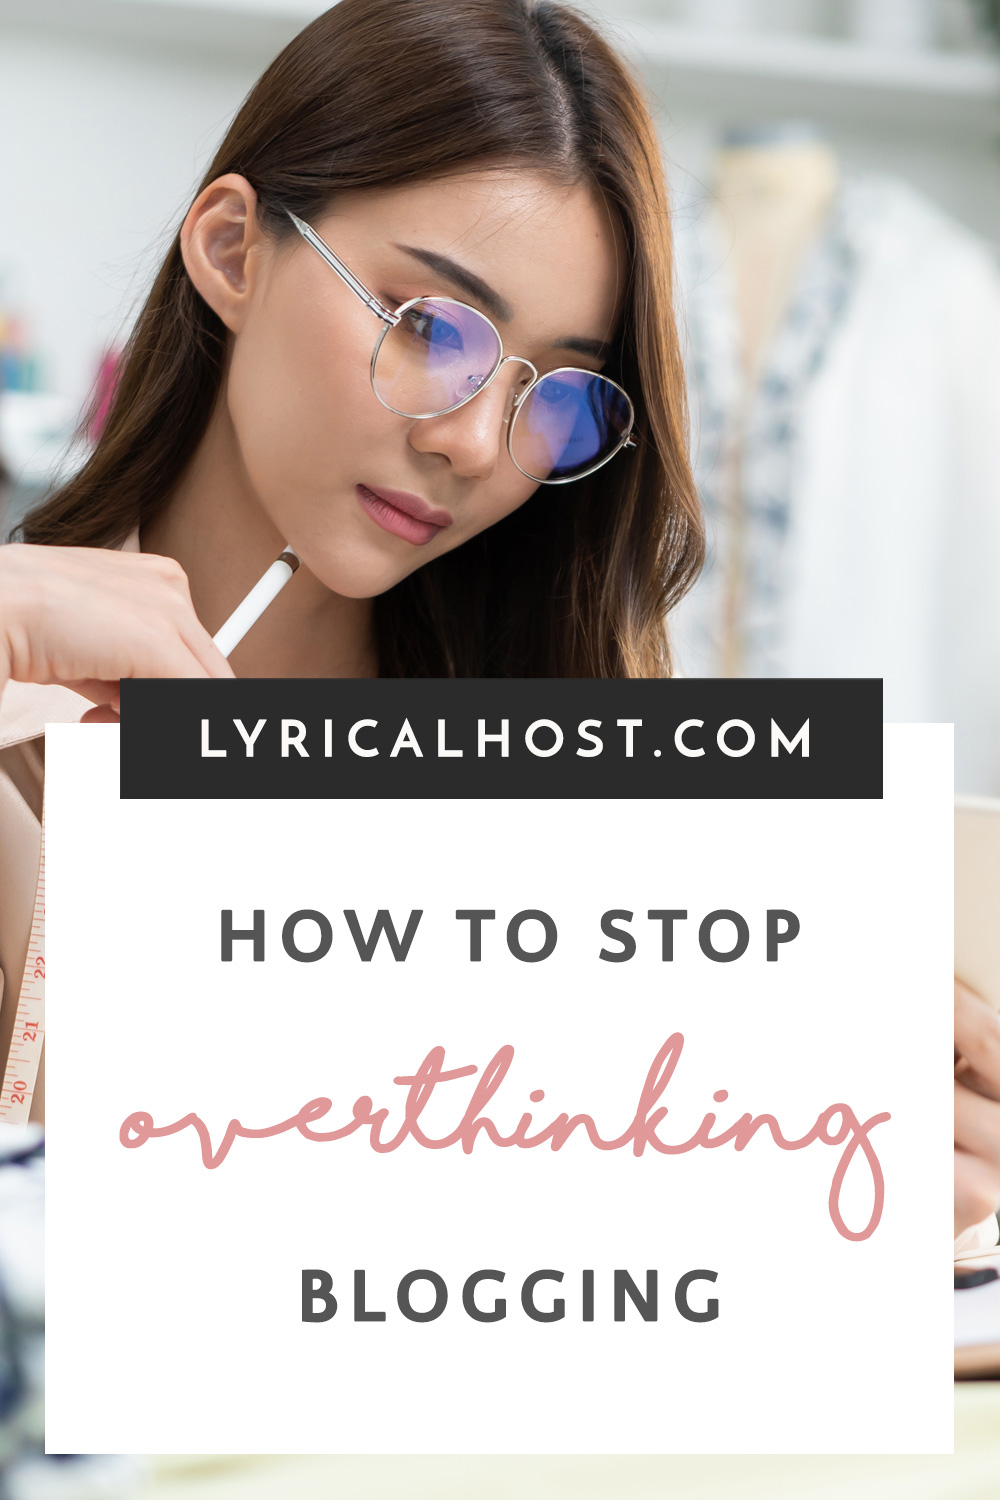 Signs you're overthinking blogging (and how to stop if so)